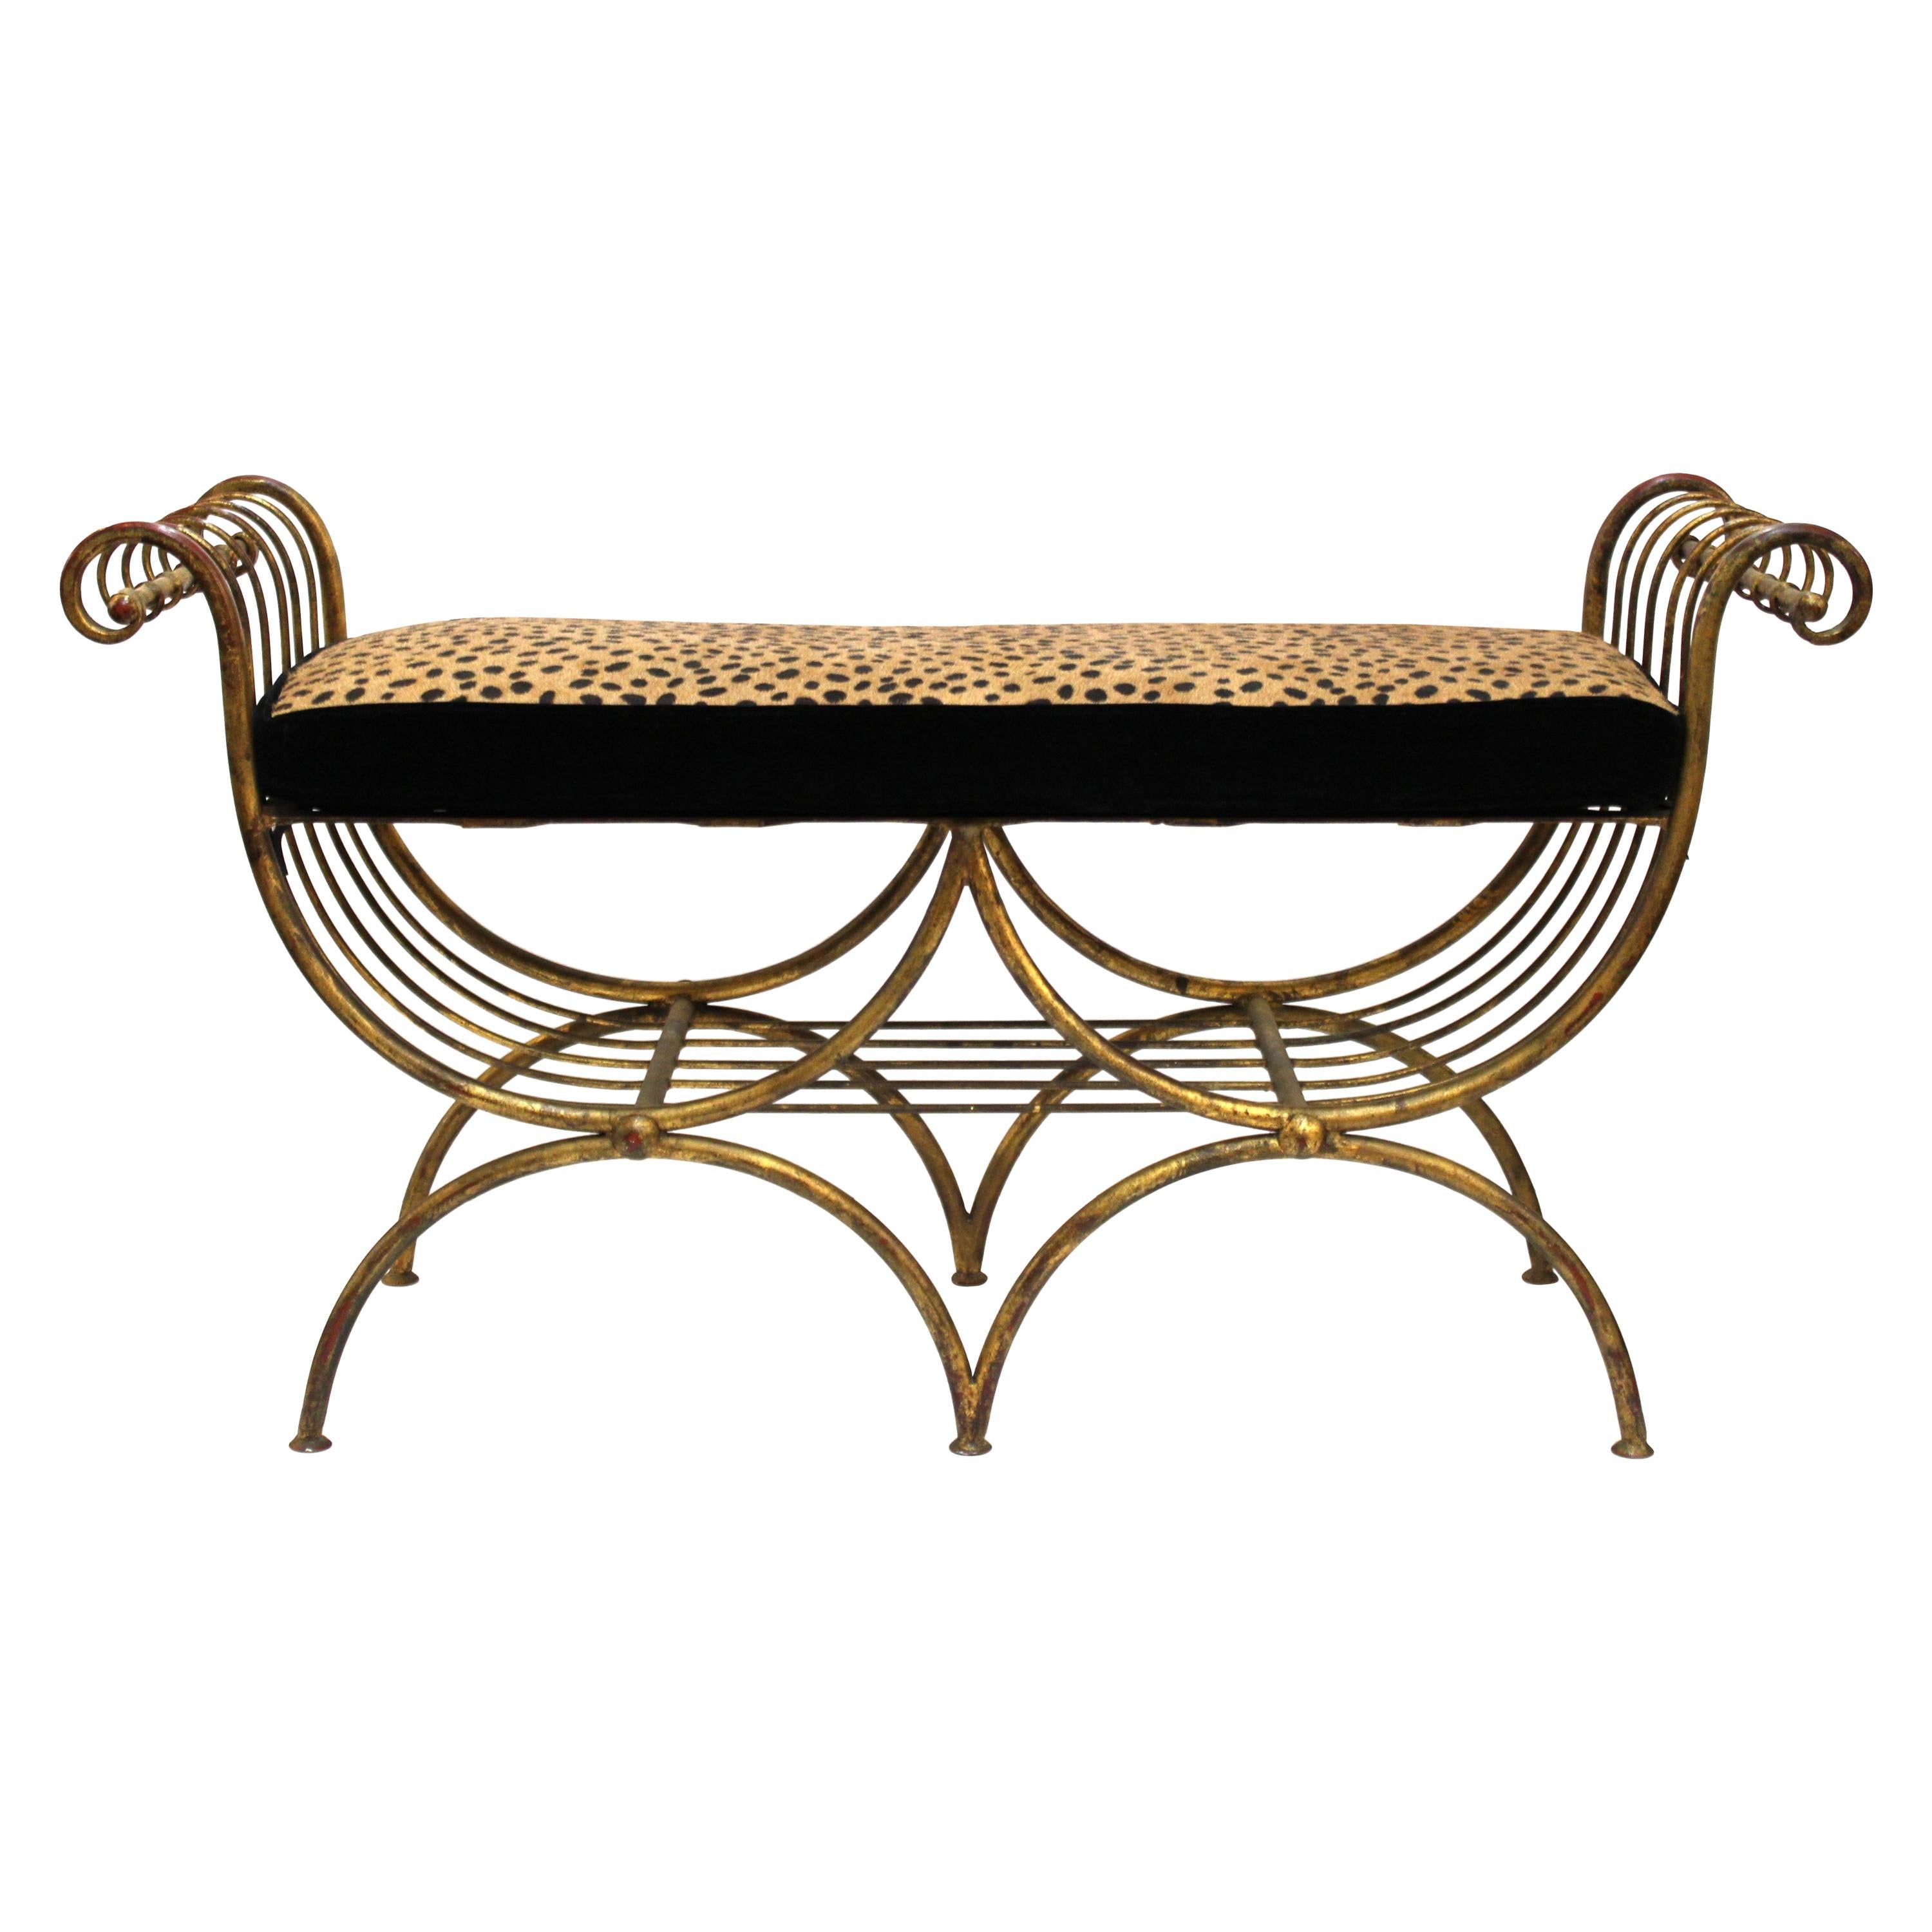 Italian Mid-Century Modern Bench in Gilt Iron with Faux Leopard Leather Seat